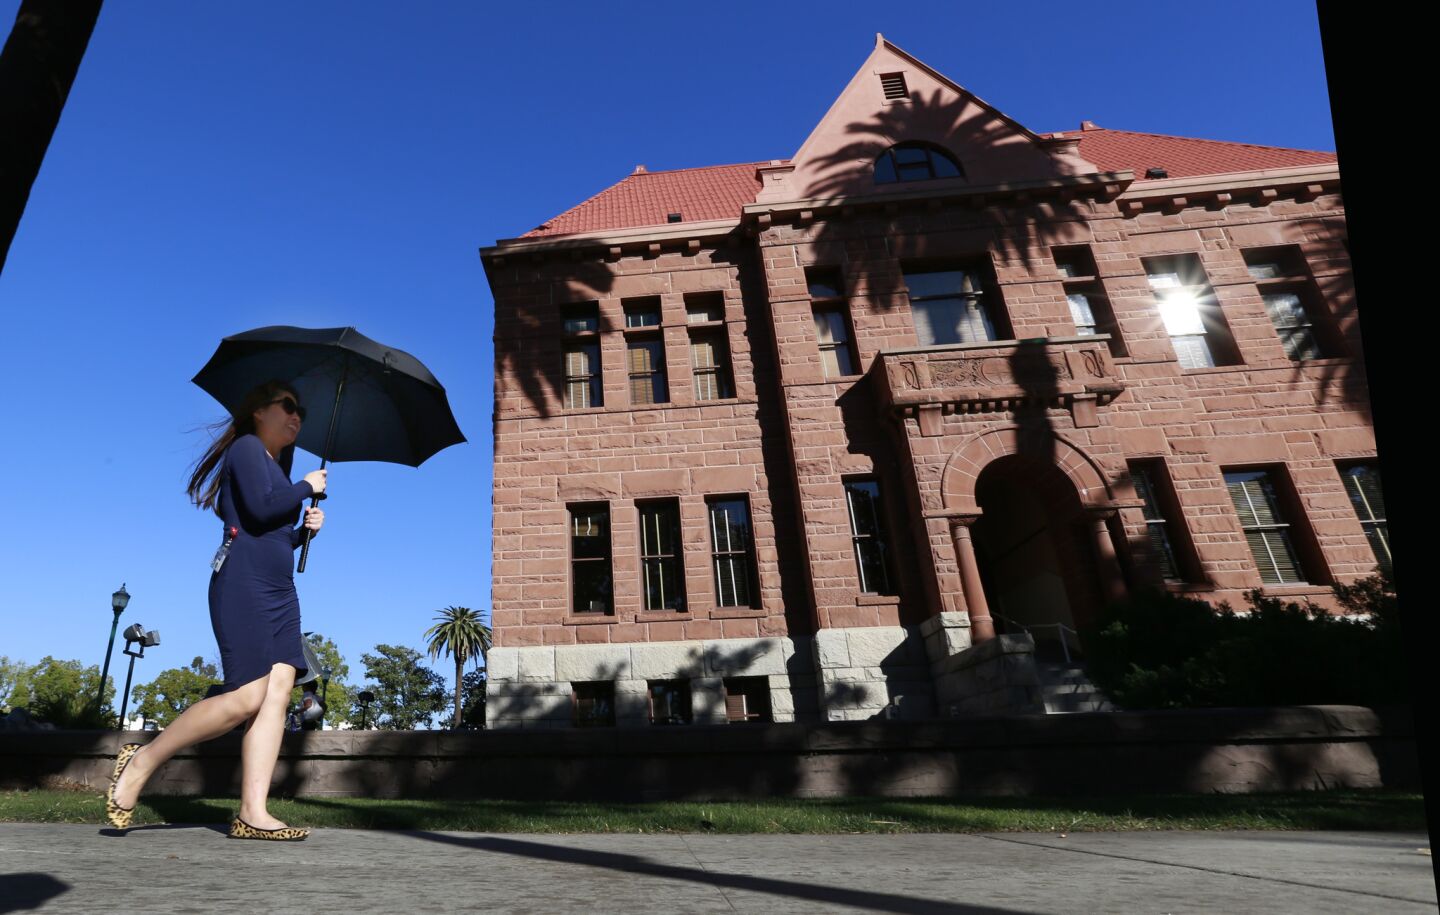 Amid high winter temperatures, a pedestrian uses an umbrella for shade outside the Old Orange County Courthouse in Santa Ana.